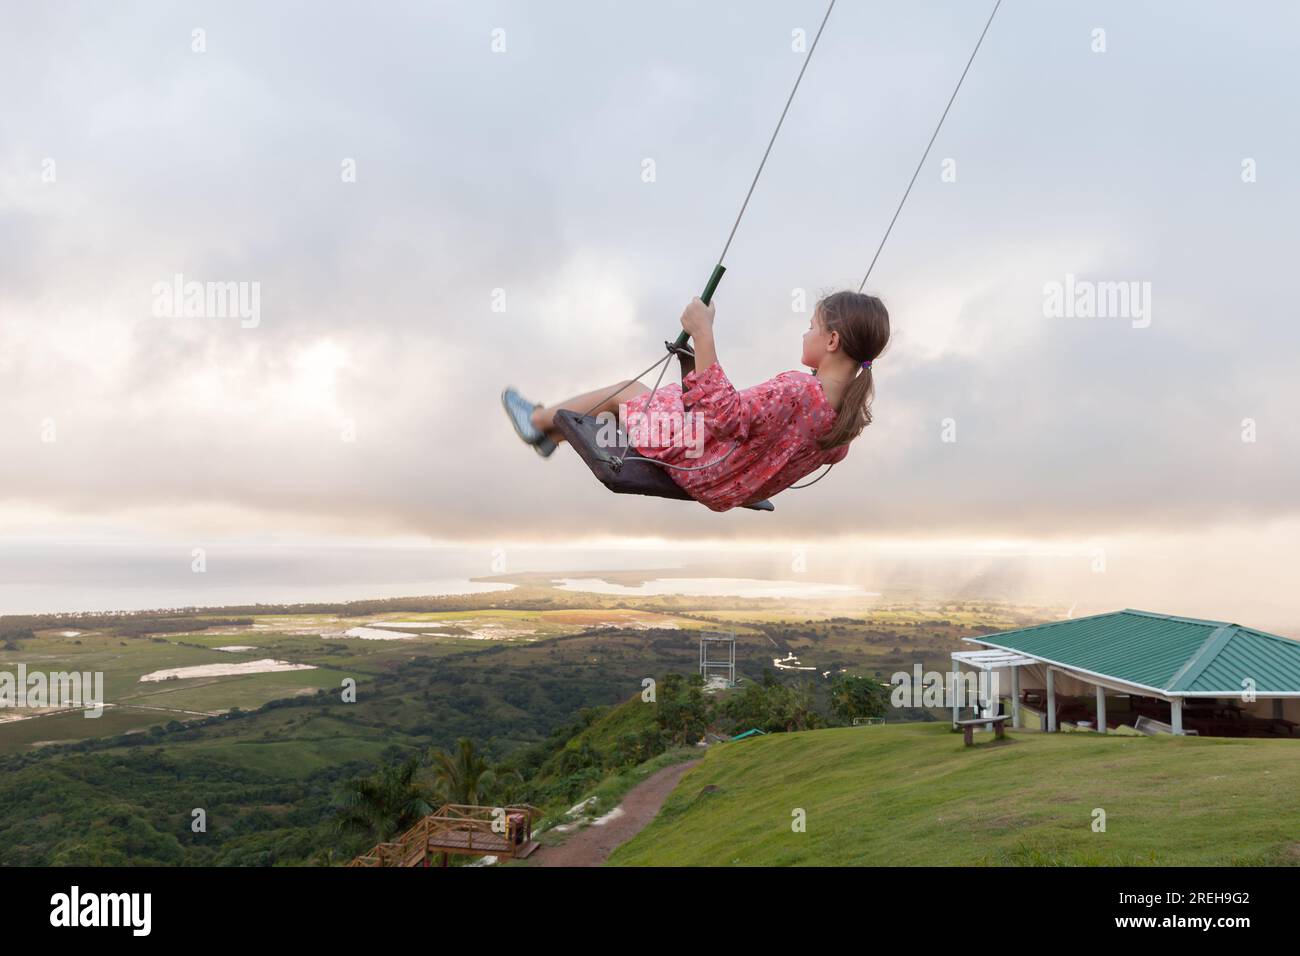 Little girl is on a swing under cloudy sky. Montana Redonda, Dominican Republic Stock Photo